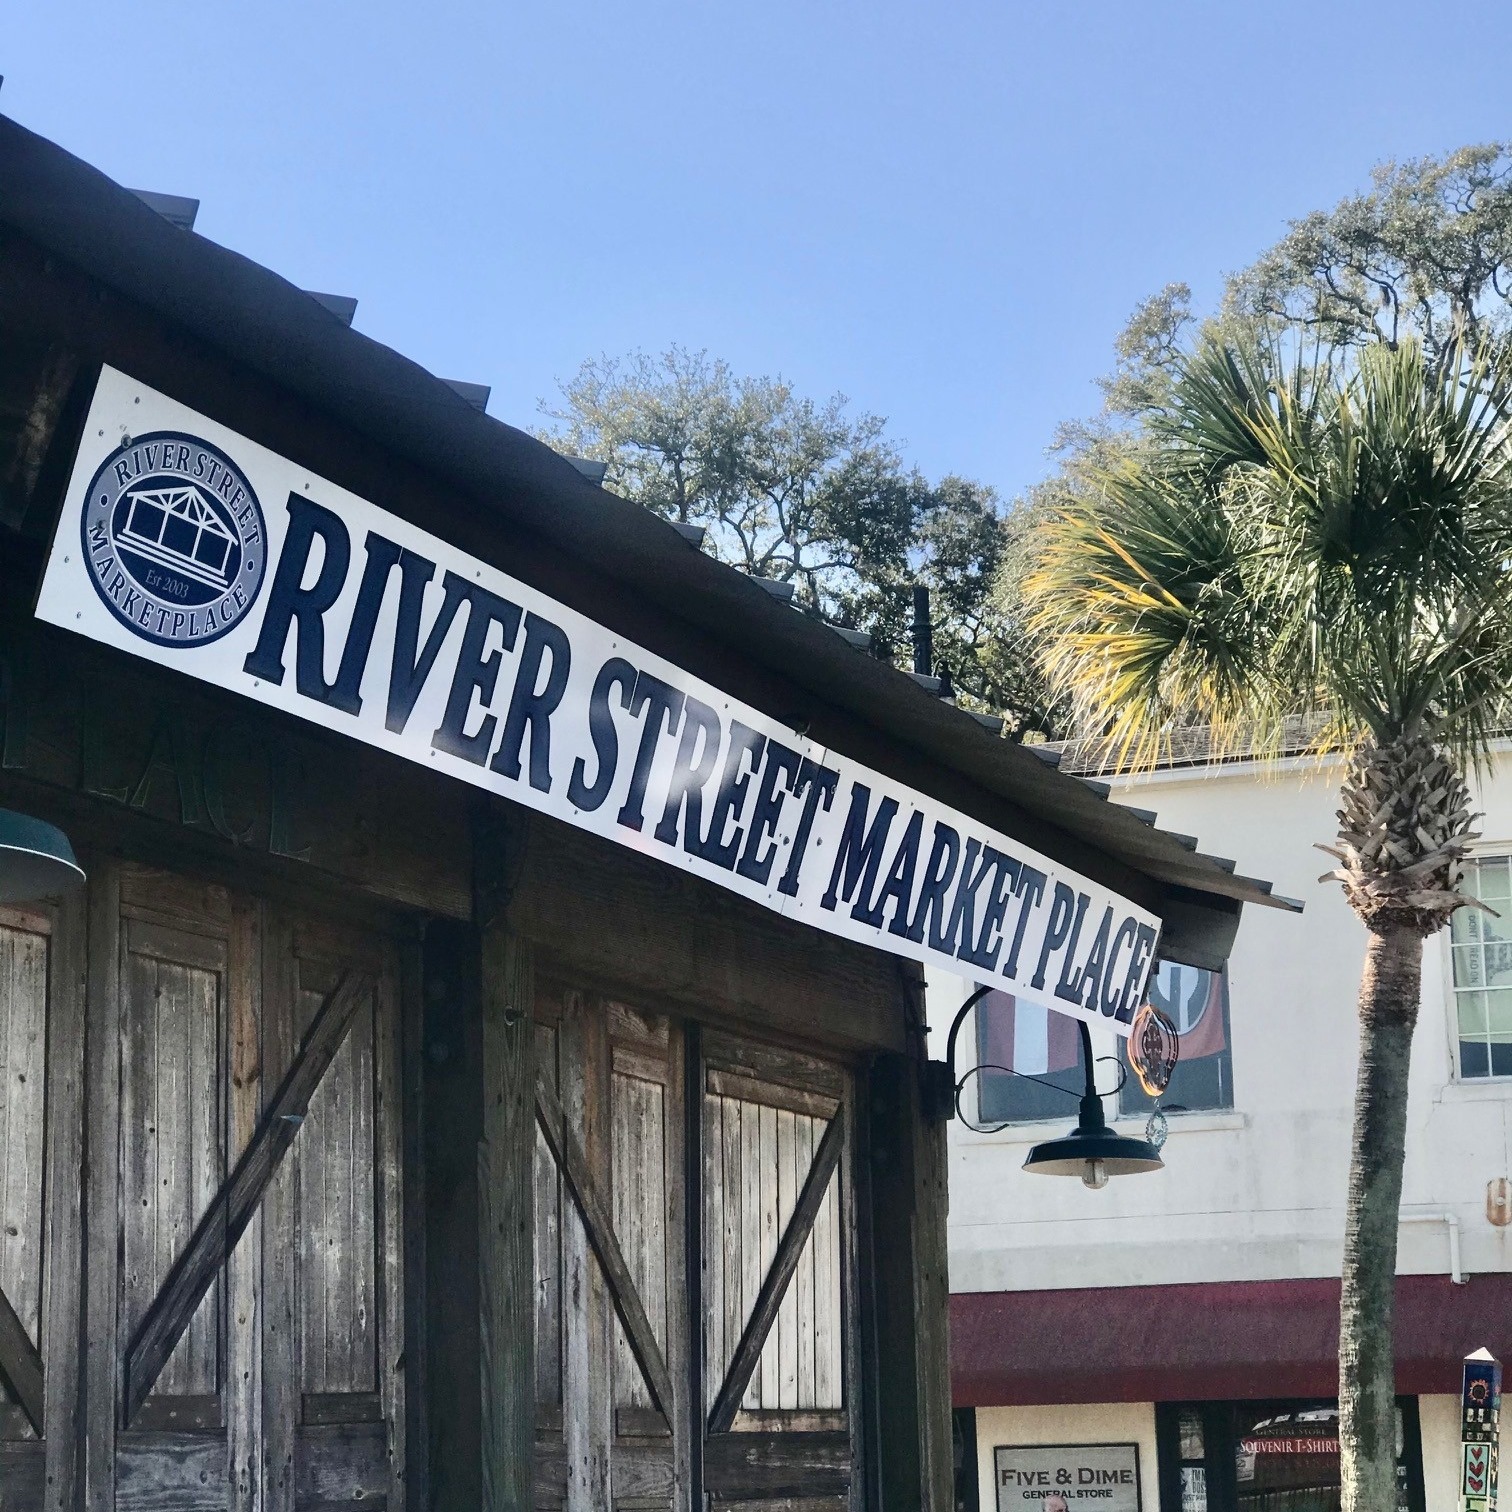 Business logo of River Street Market Place